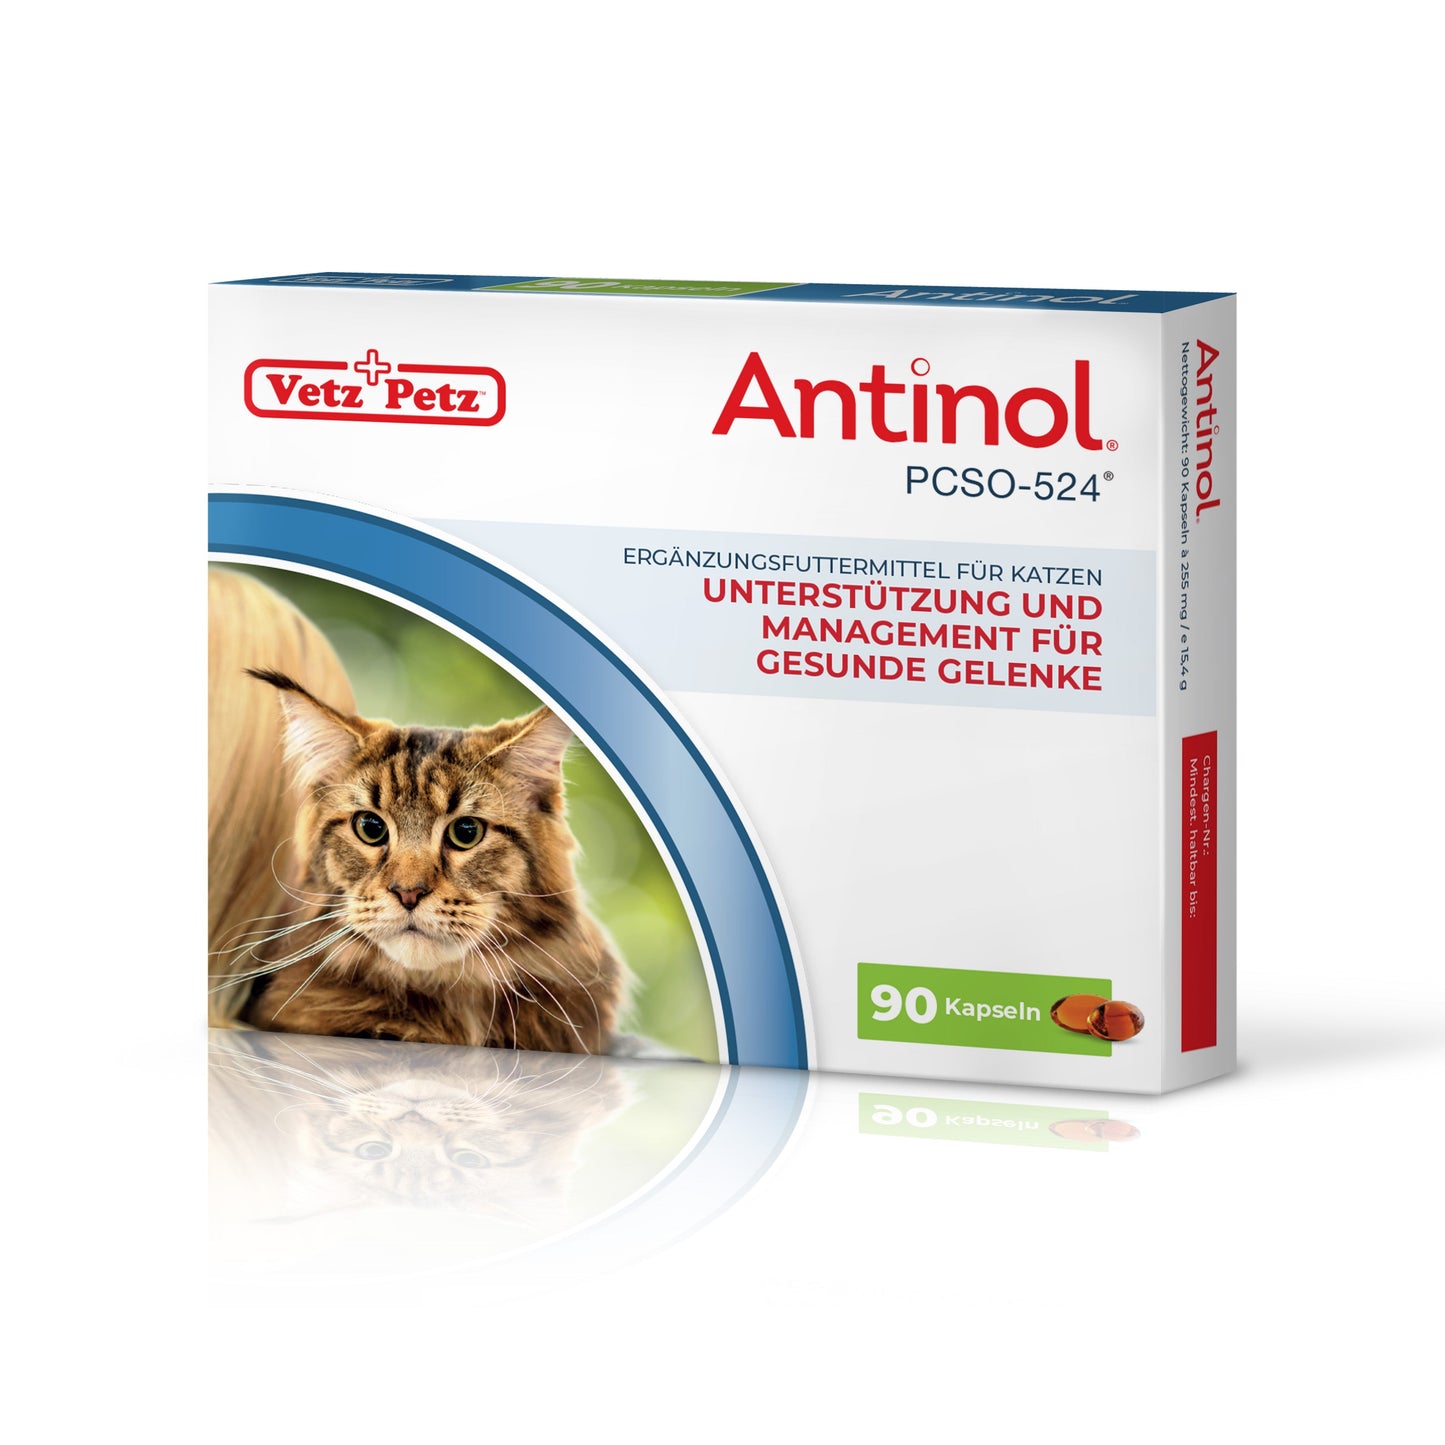 Antinol<sup>®</sup>️ for cats